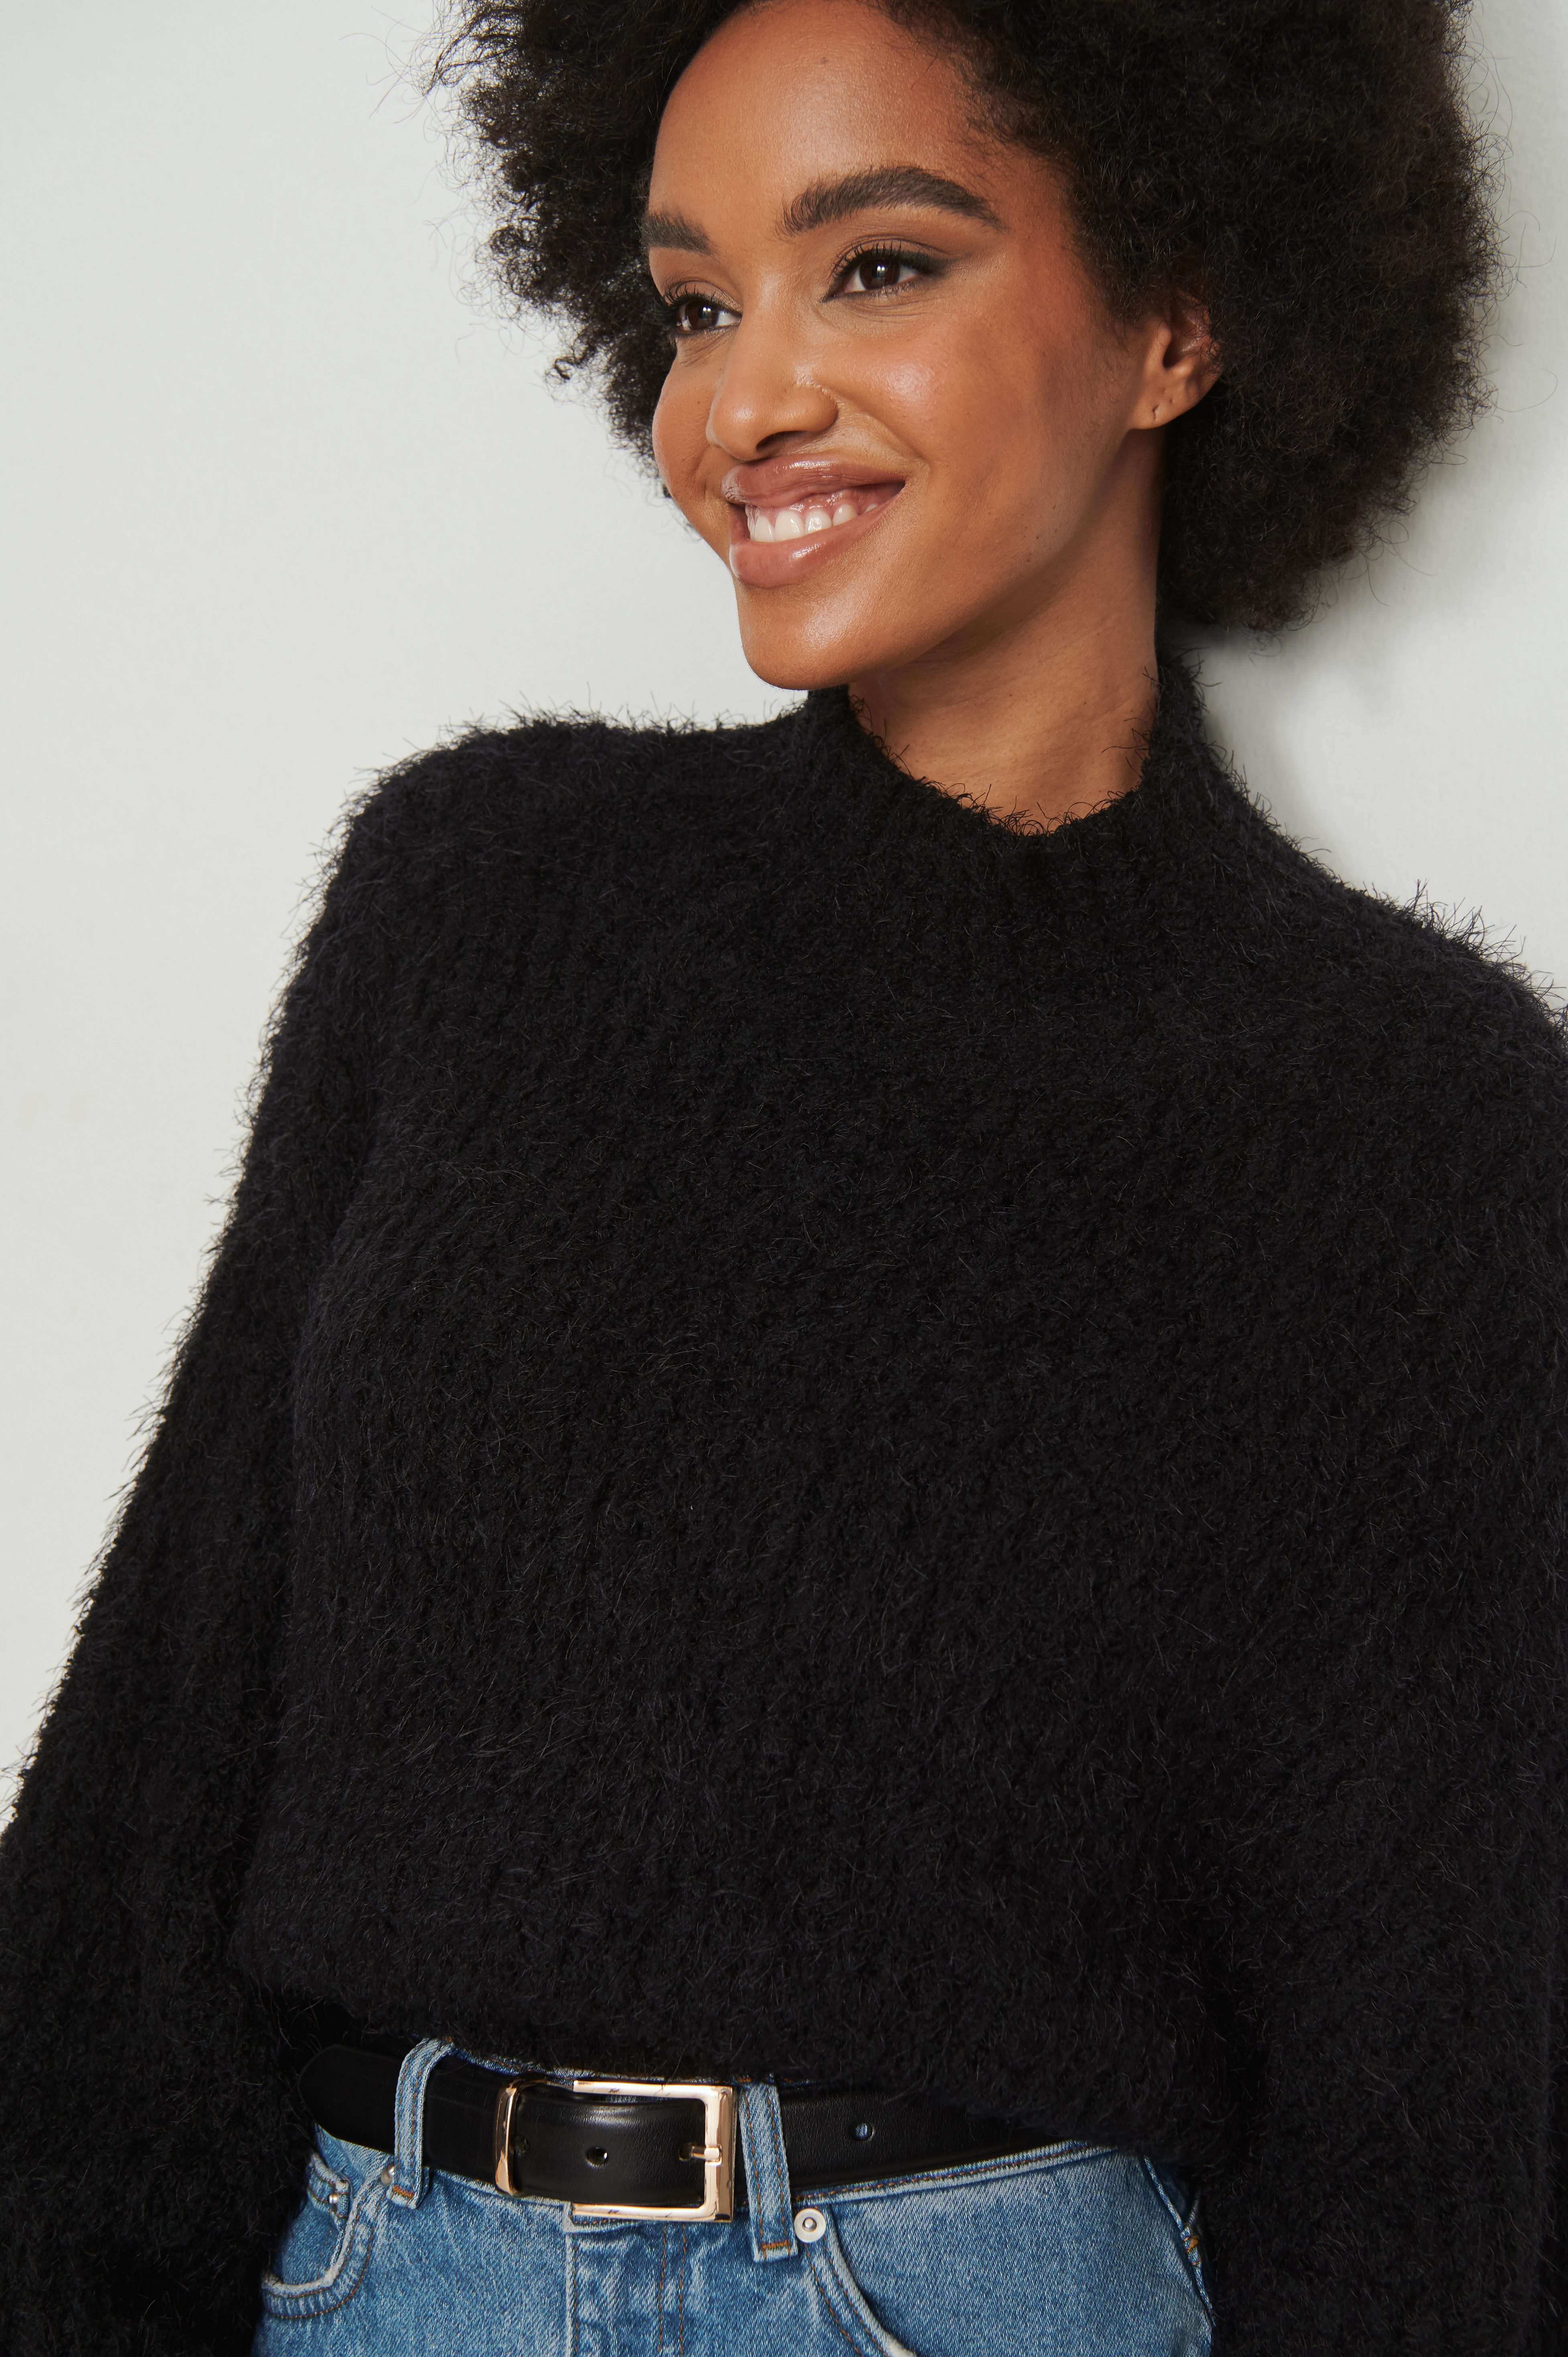 Black Fluffy Knitted Sweater